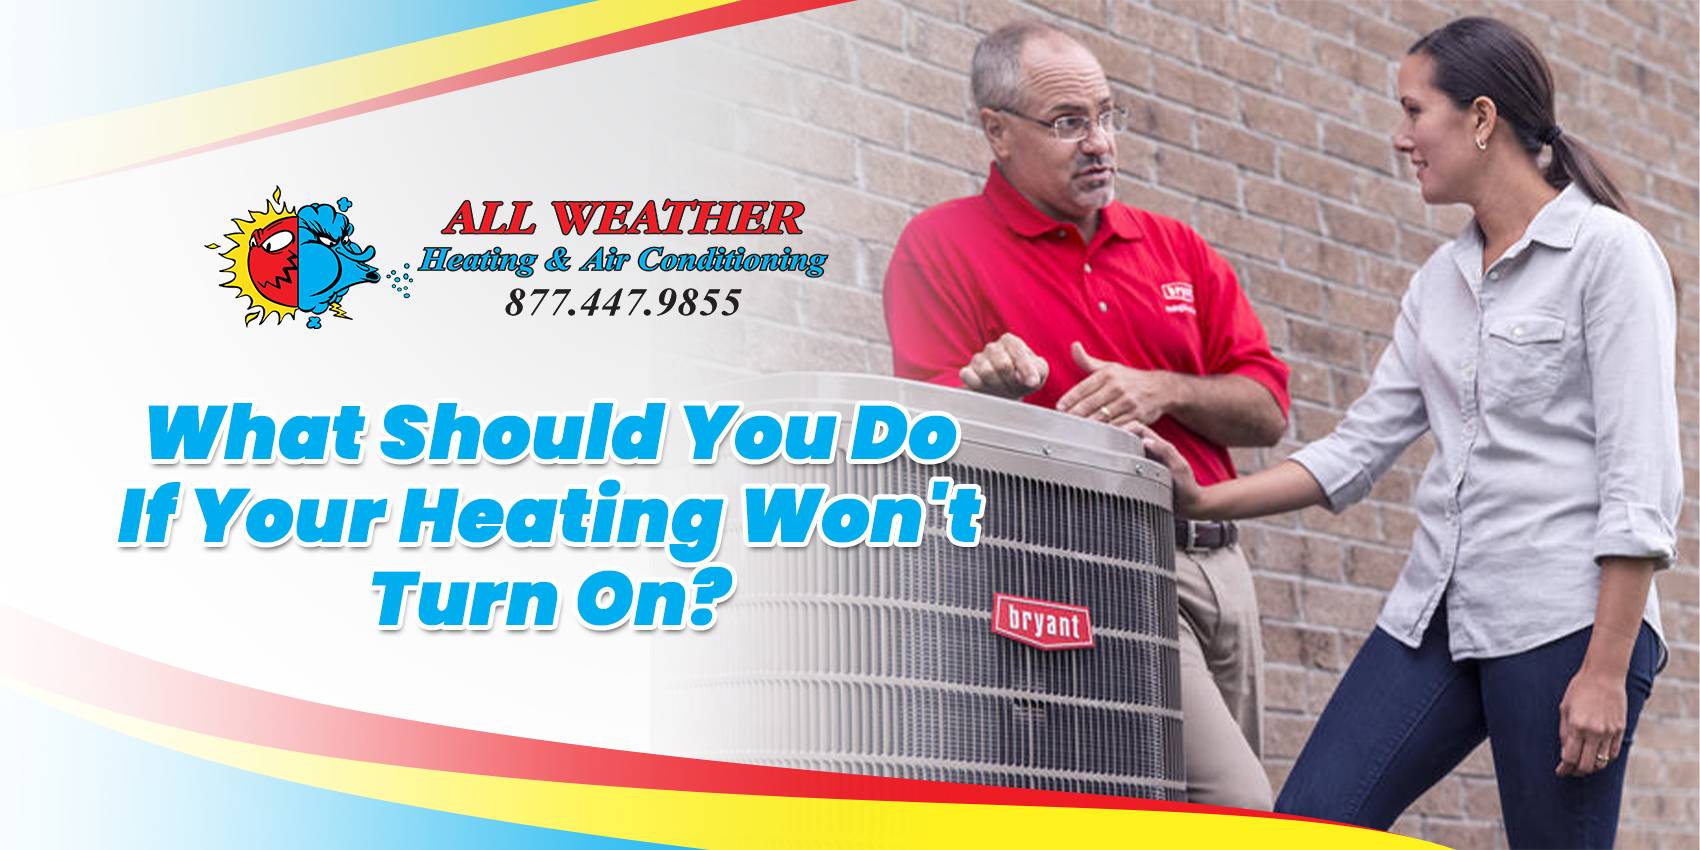 What should you do if your heating won't turn on?